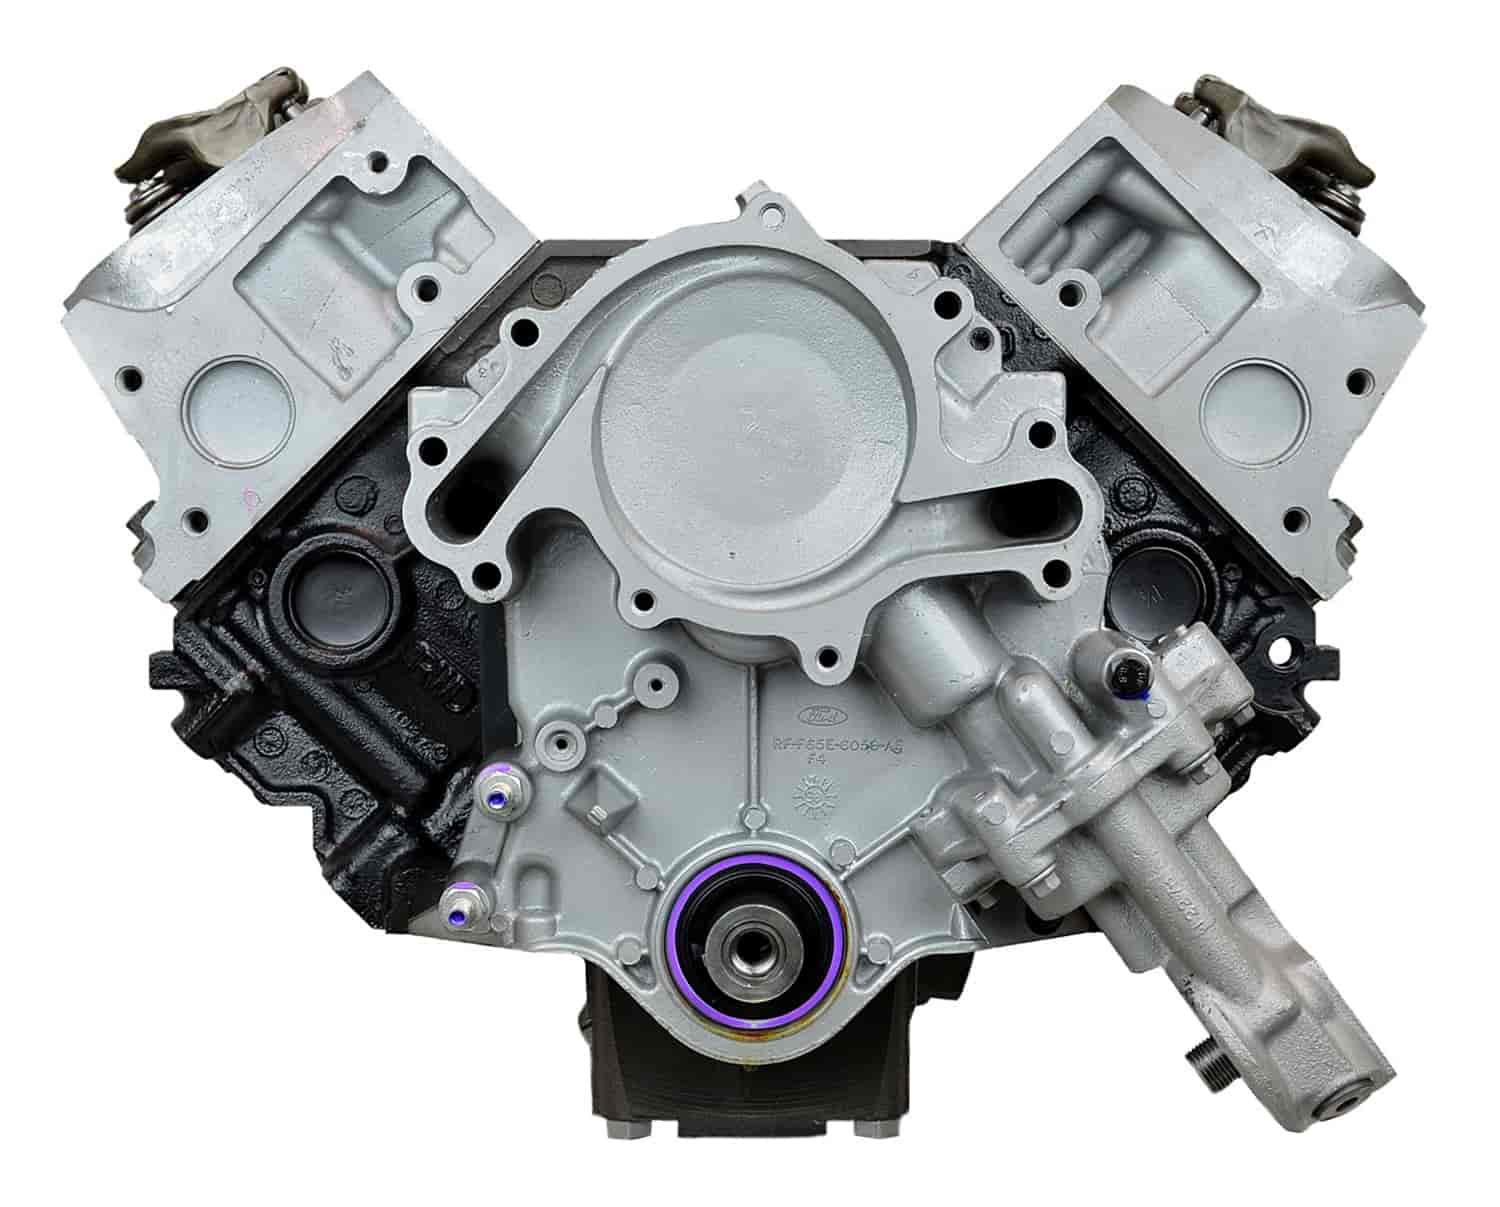 Remanufactured Crate Engine for 2001-2008 Ford F-Series Truck & E-Series Van with 4.2L V6